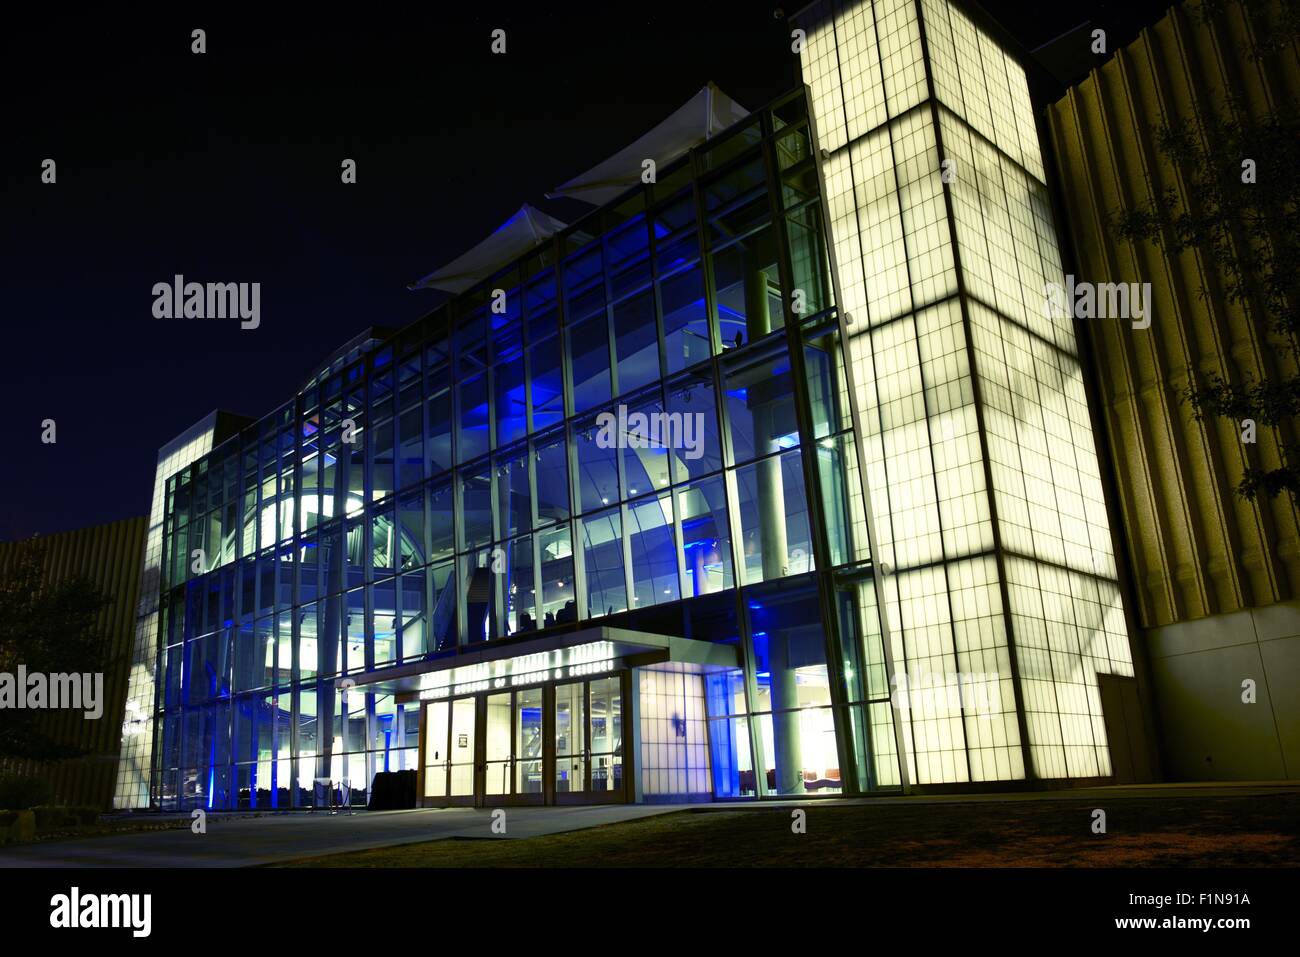 FOR EDITORIAL USE ONLY. Denver Museum of Nature and Science at Night. Denver, Colorado, United States. Stock Photo